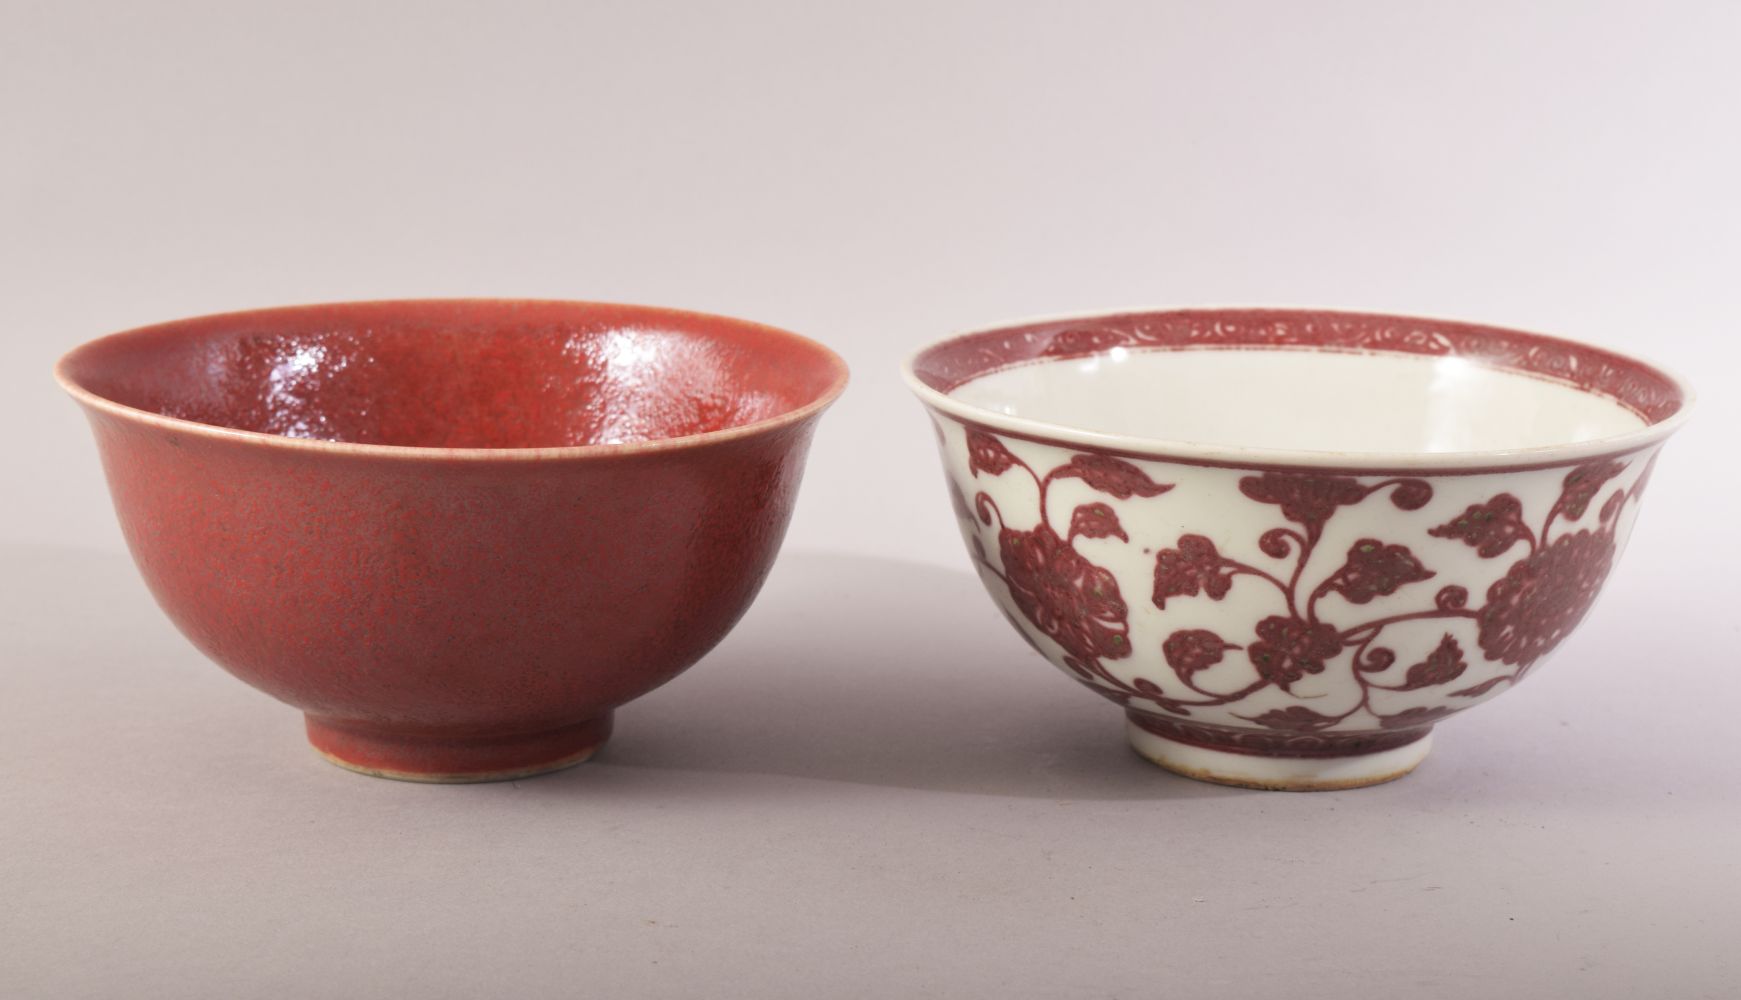 TWO CHINESE PORCELAIN BOWLS, one with red and white floral decoration, the other with red